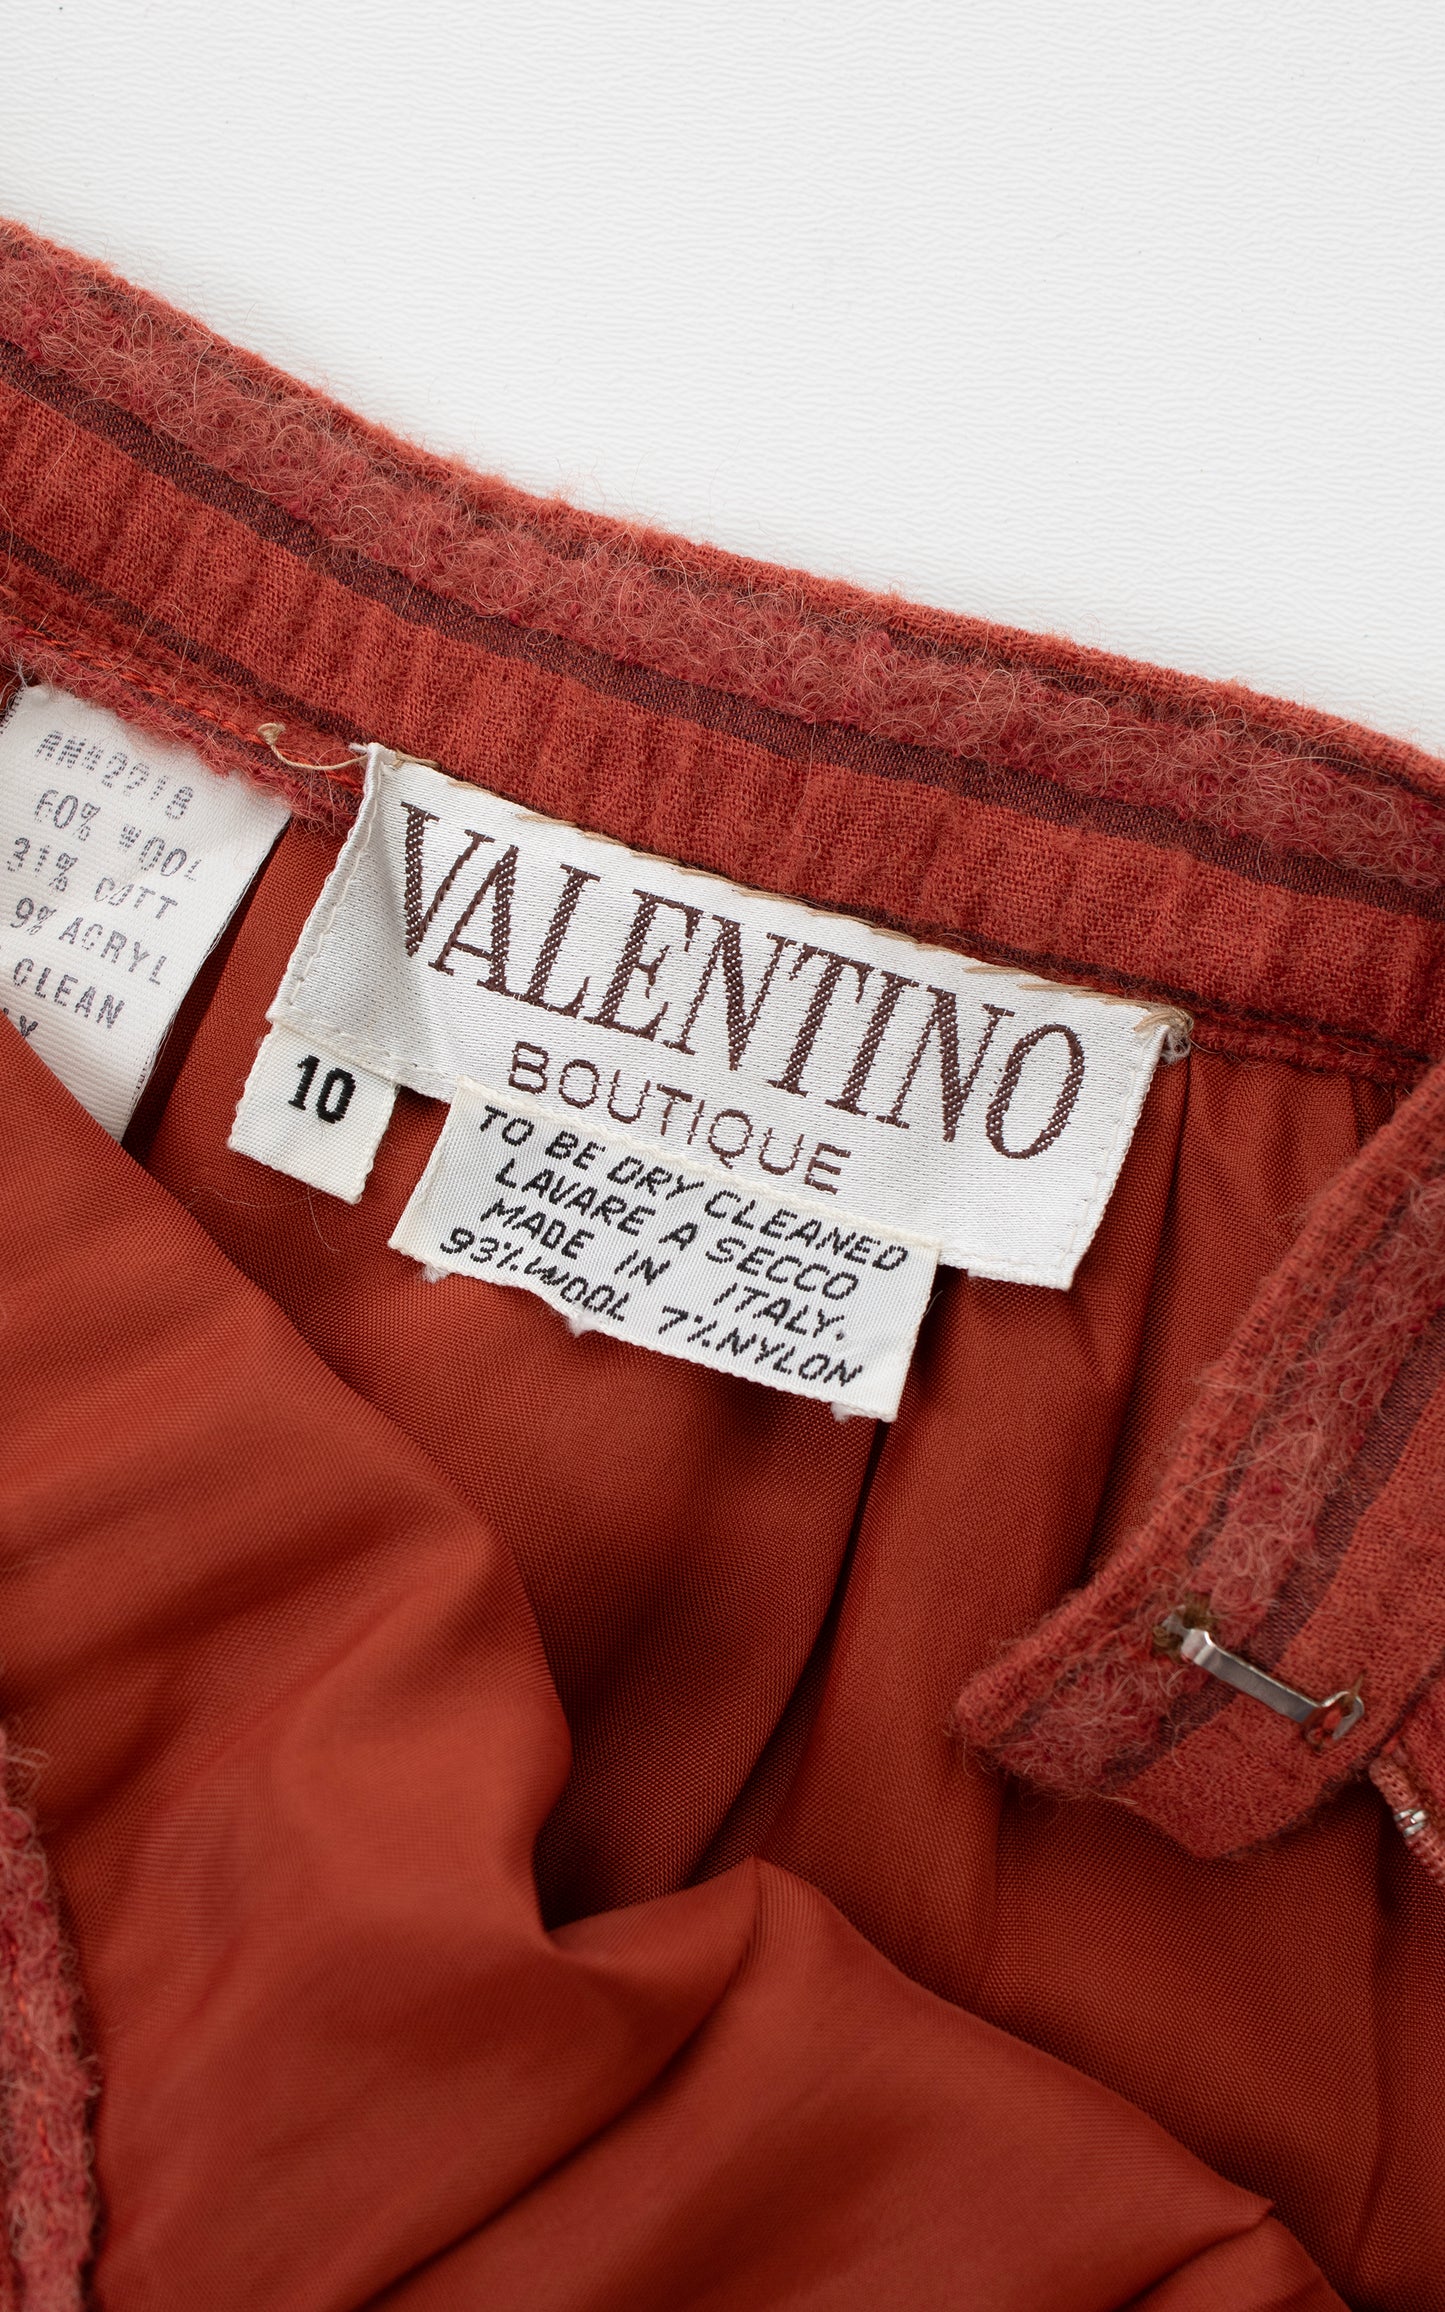 1970s VALENTINO BOUTIQUE Wool Pencil Skirt | small